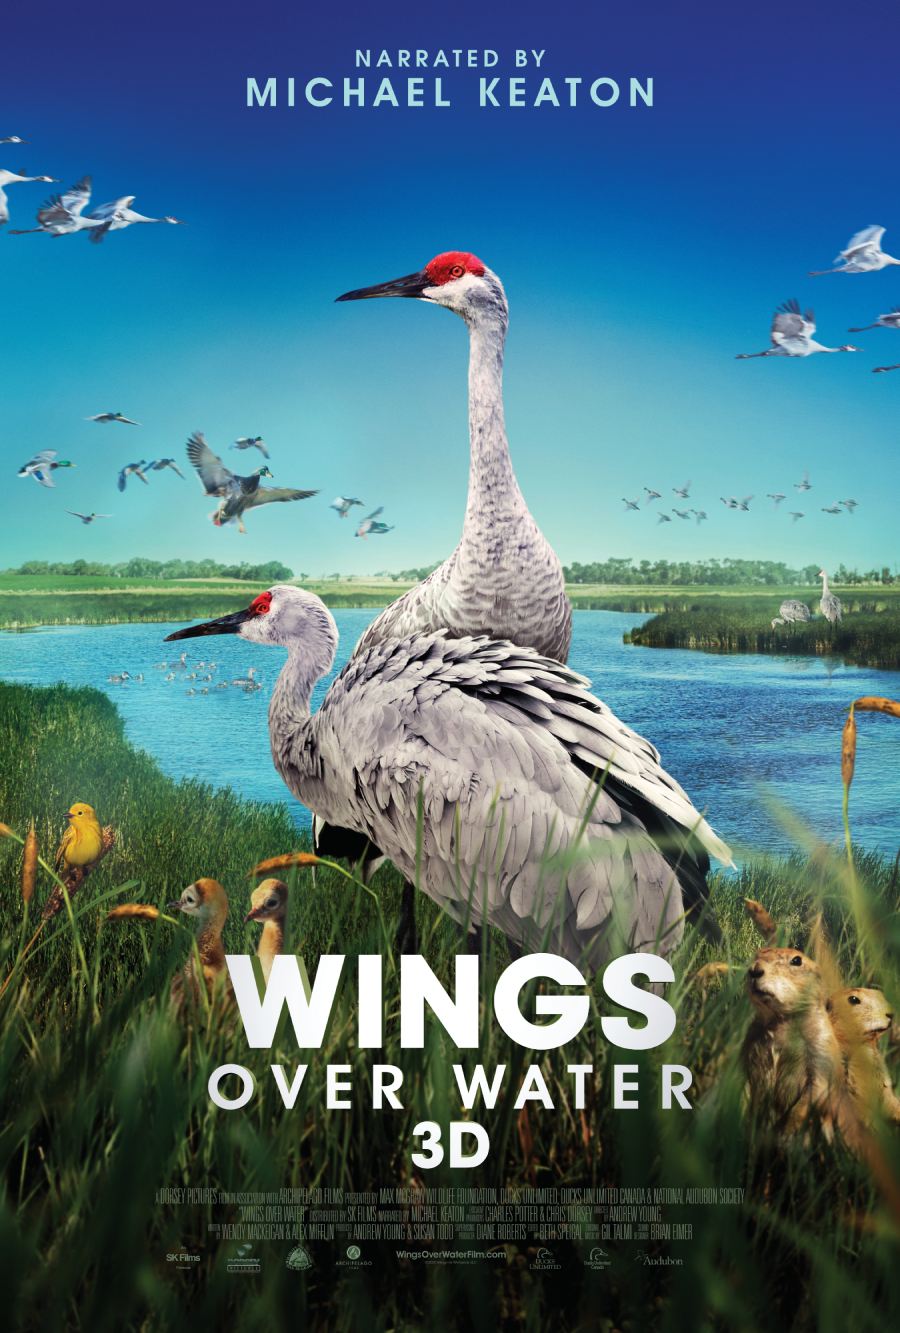 Wings Over Water About the Film